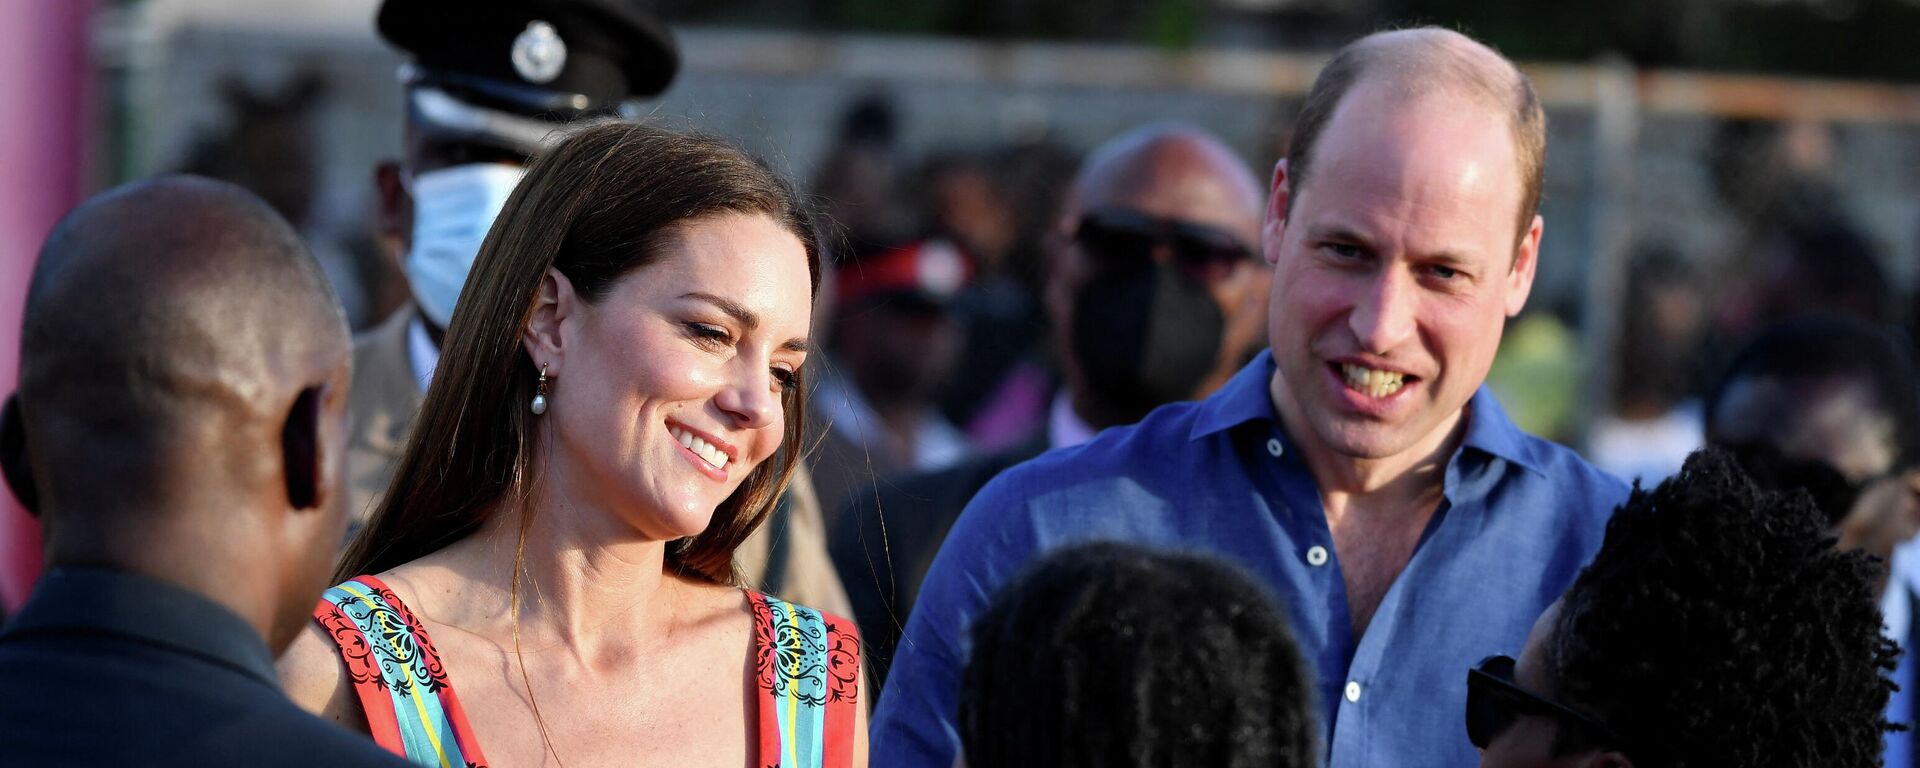 Britain's Prince William and Catherine, Duchess of Cambridge, visit Trench Town on the fourth day of their tour of the Caribbean, in Kingston, Jamaica, March 22, 2022 - Sputnik International, 1920, 23.03.2022